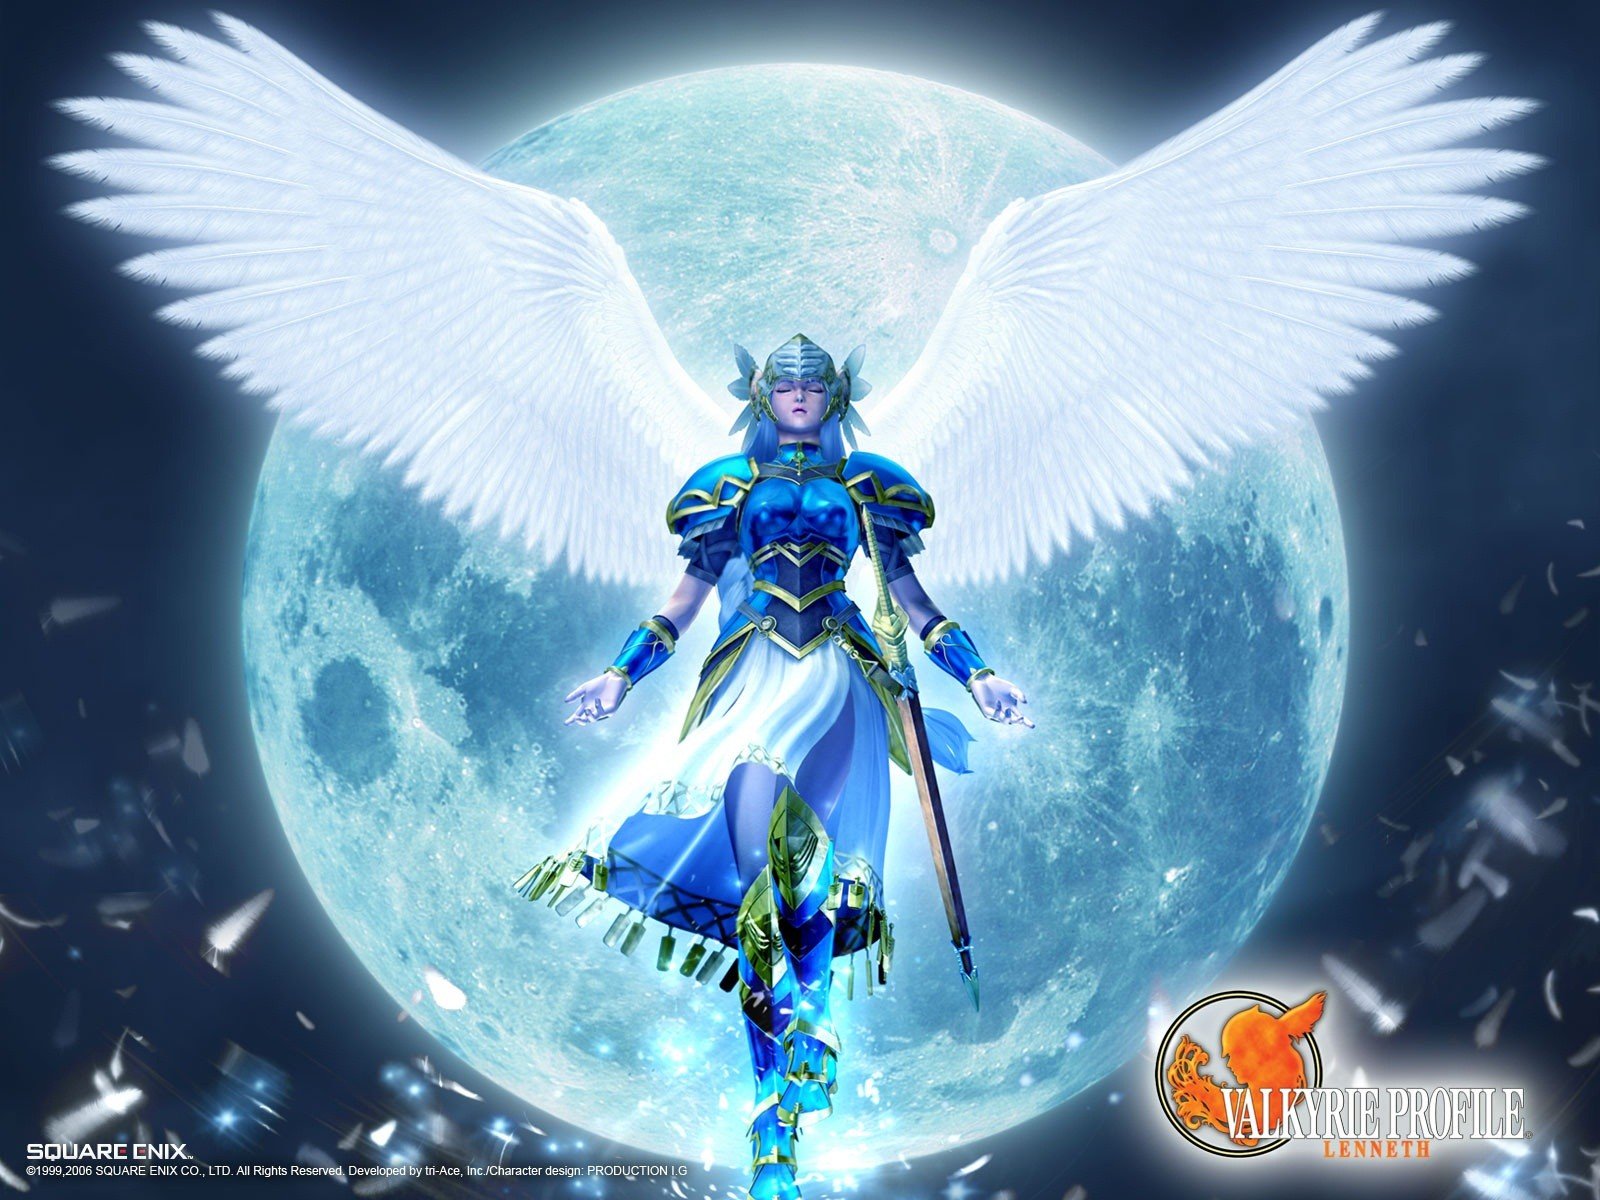 video, Games, Valkyrie, Valkyrie, Profile , Lenneth Wallpaper